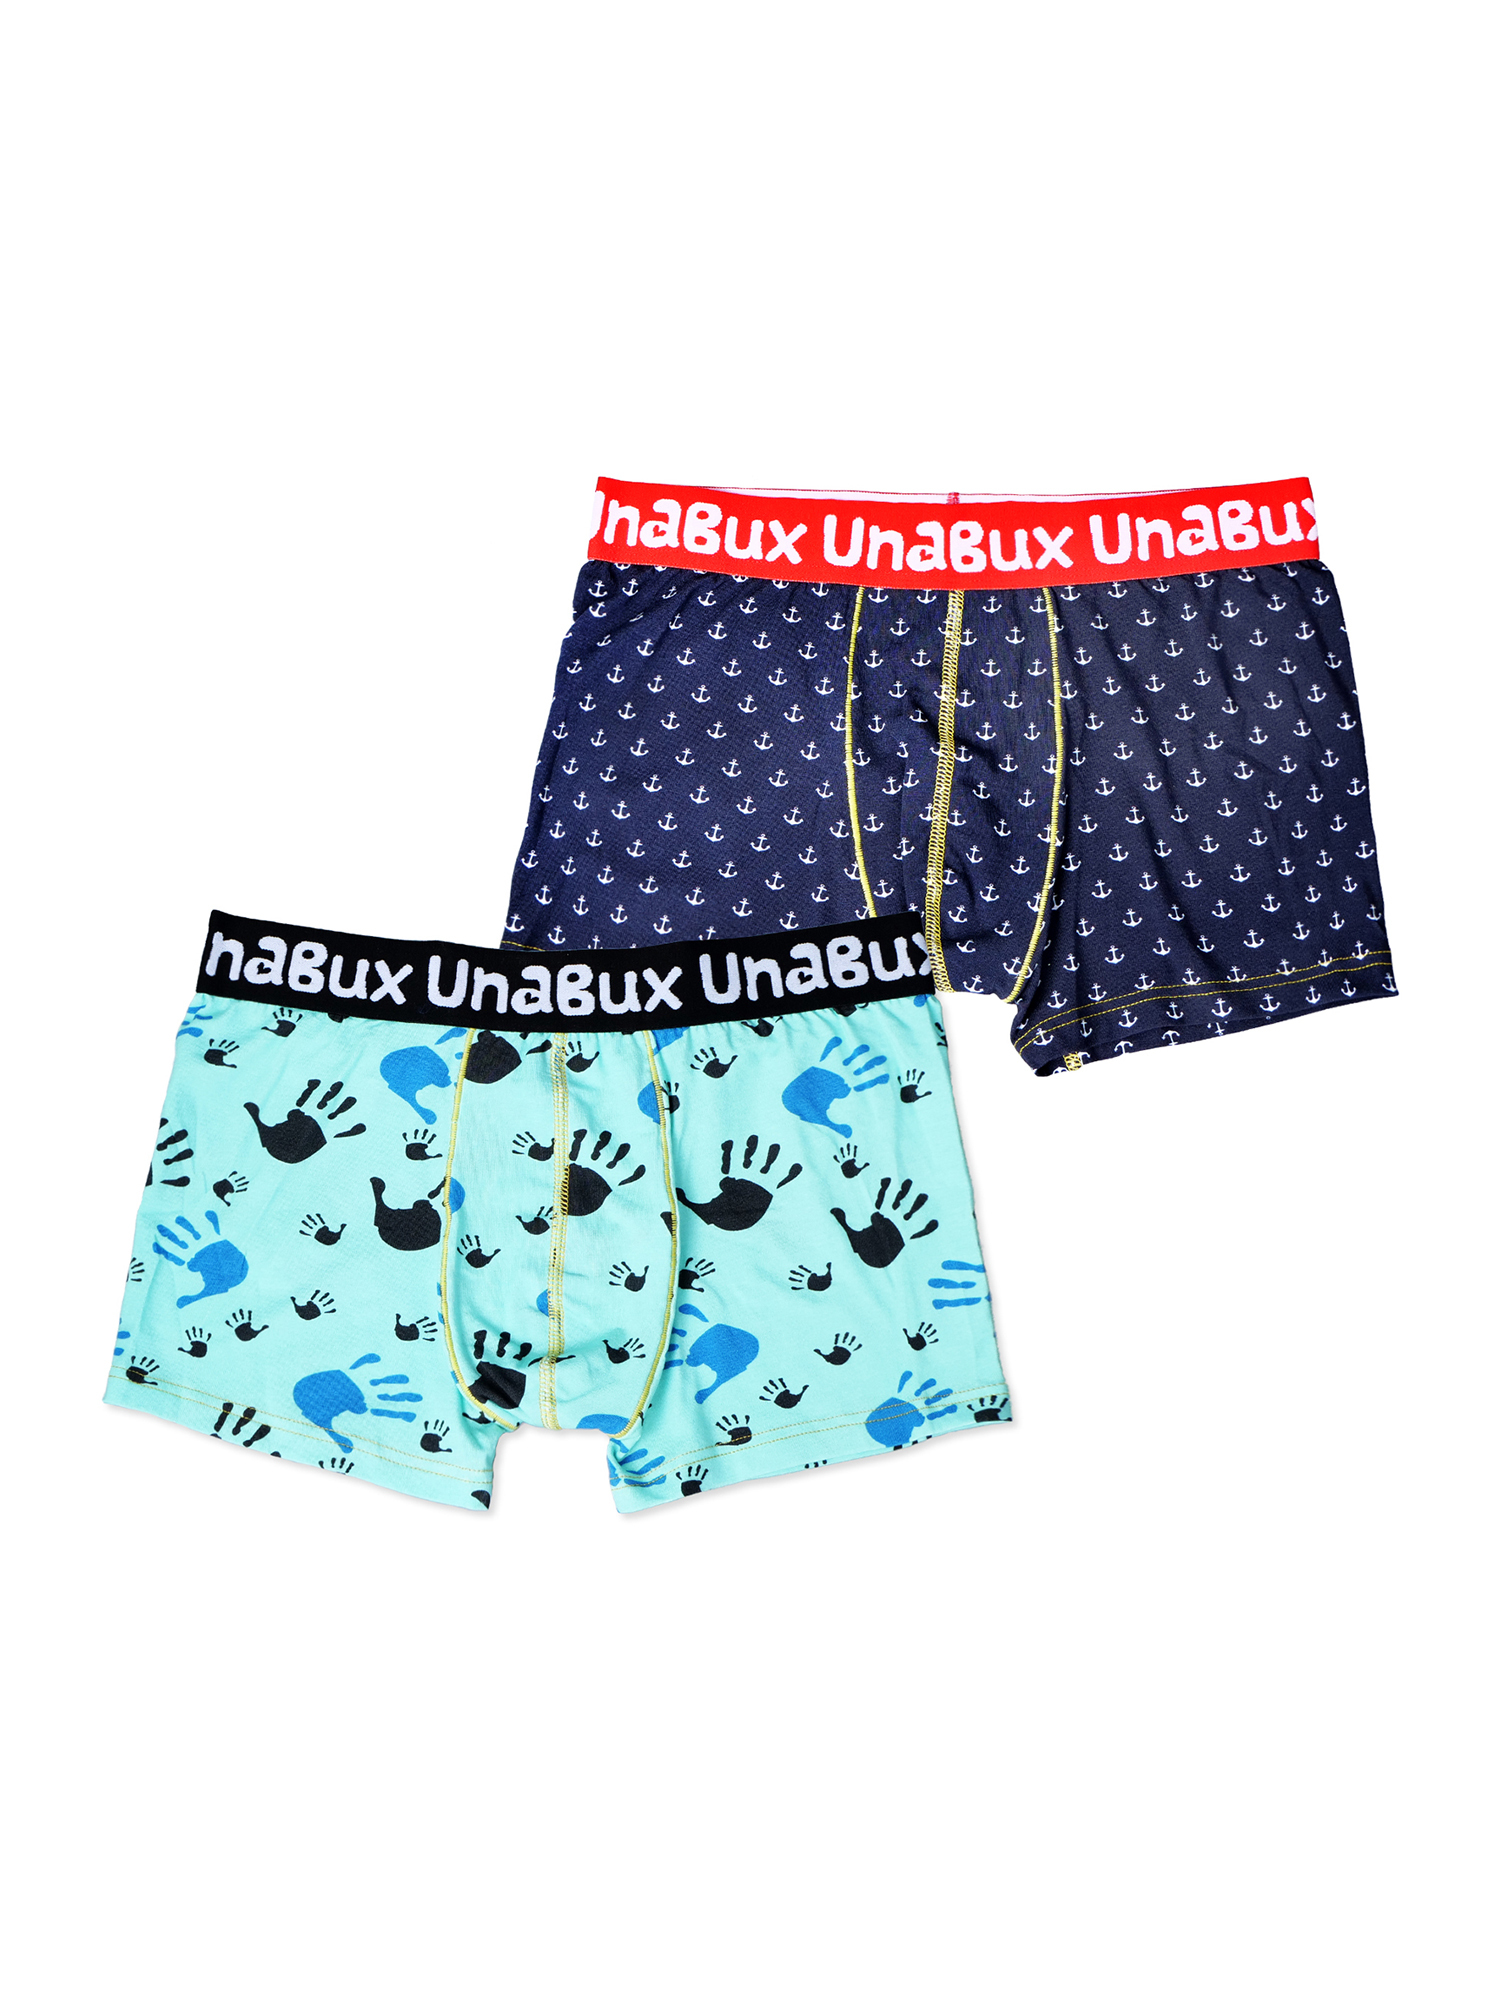 Боксеры Unabux Boxer Briefs FIVE FINGERS Mix, цвет GOOD OLD ANCHOR the byke old anchor ex le pearl goa